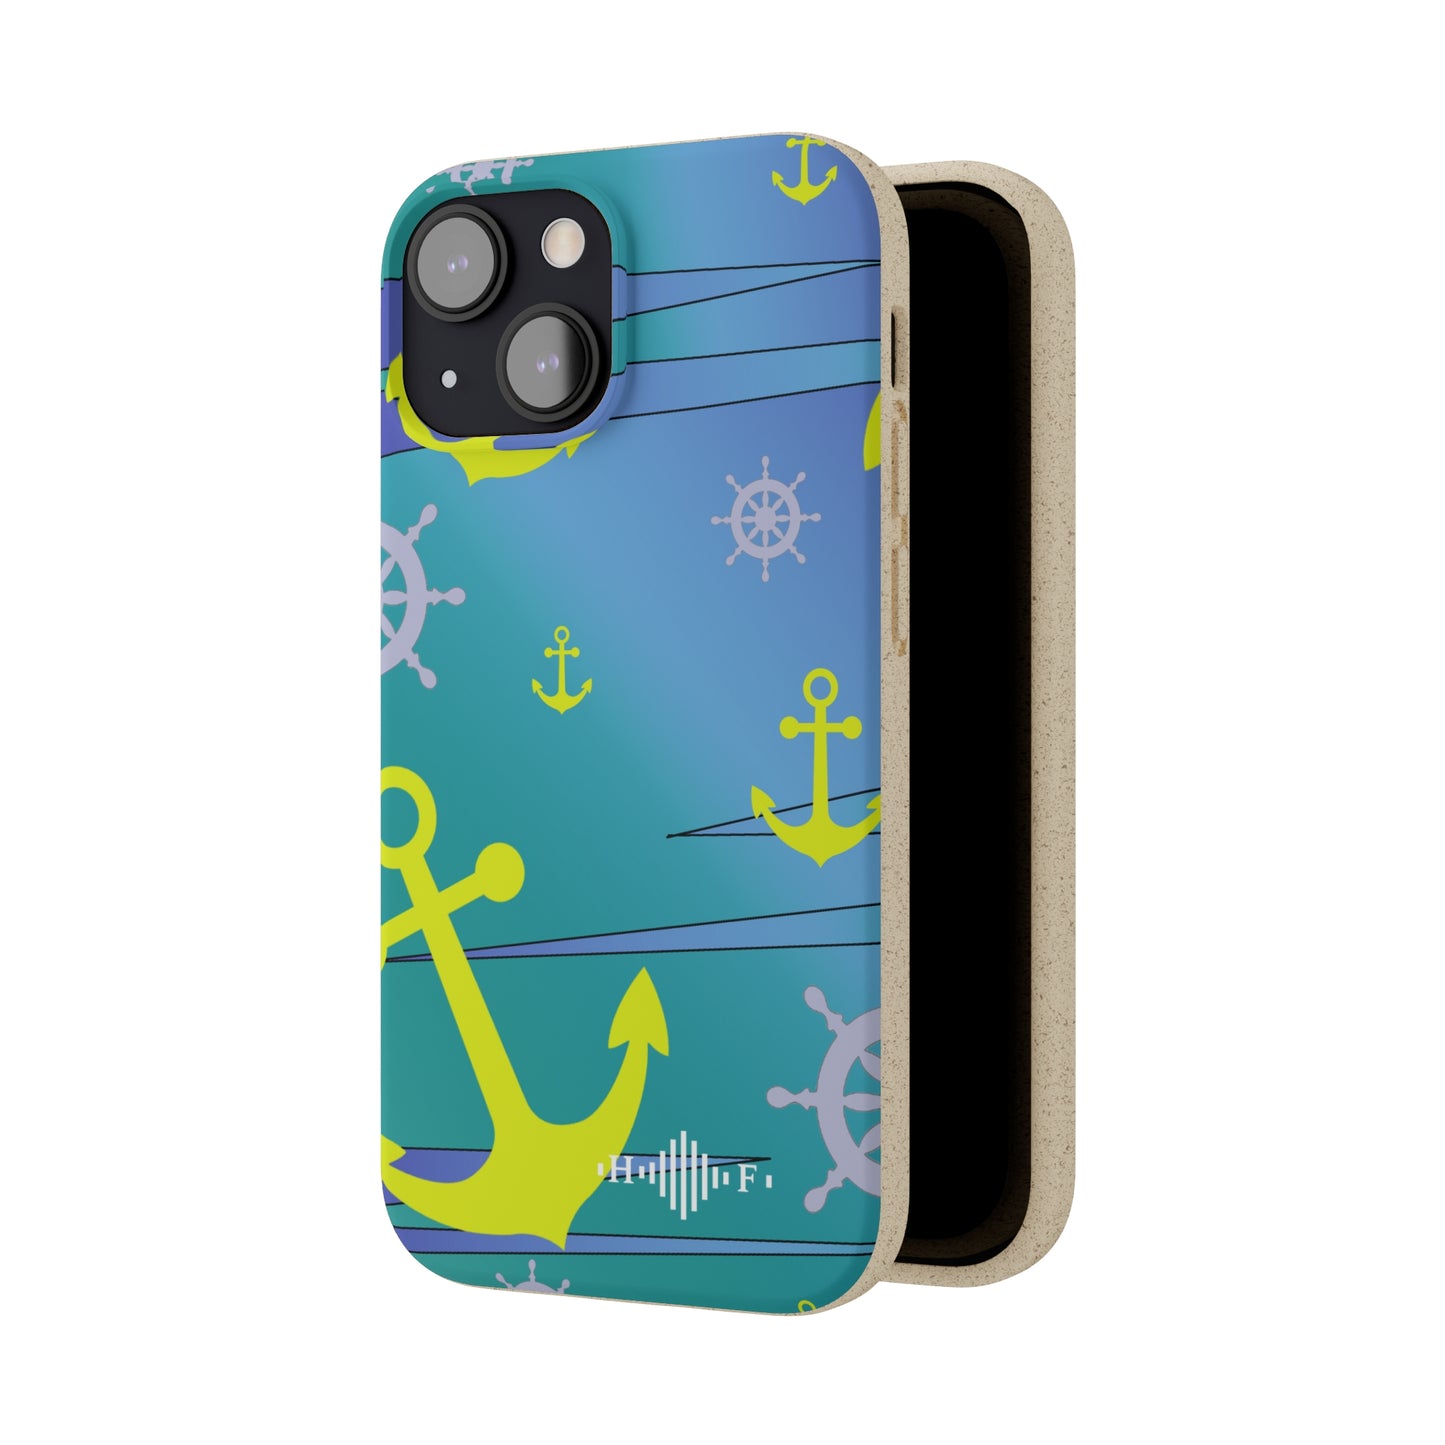 Ships Ahoy ECO FRIENDLY - Biodegradable Cases